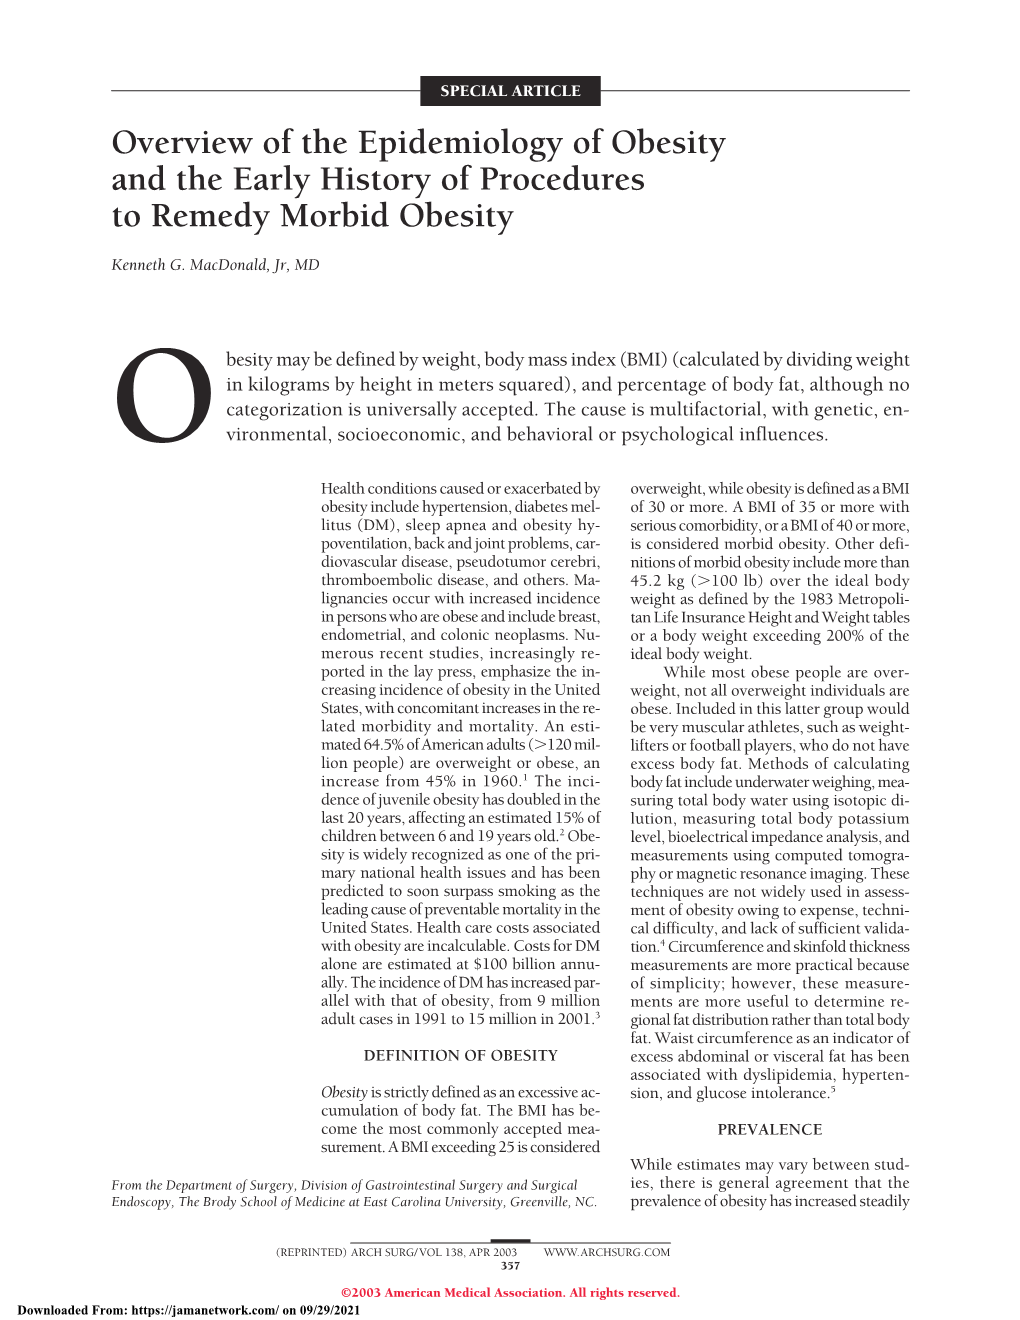 Overview of the Epidemiology of Obesity and the Early History of Procedures to Remedy Morbid Obesity